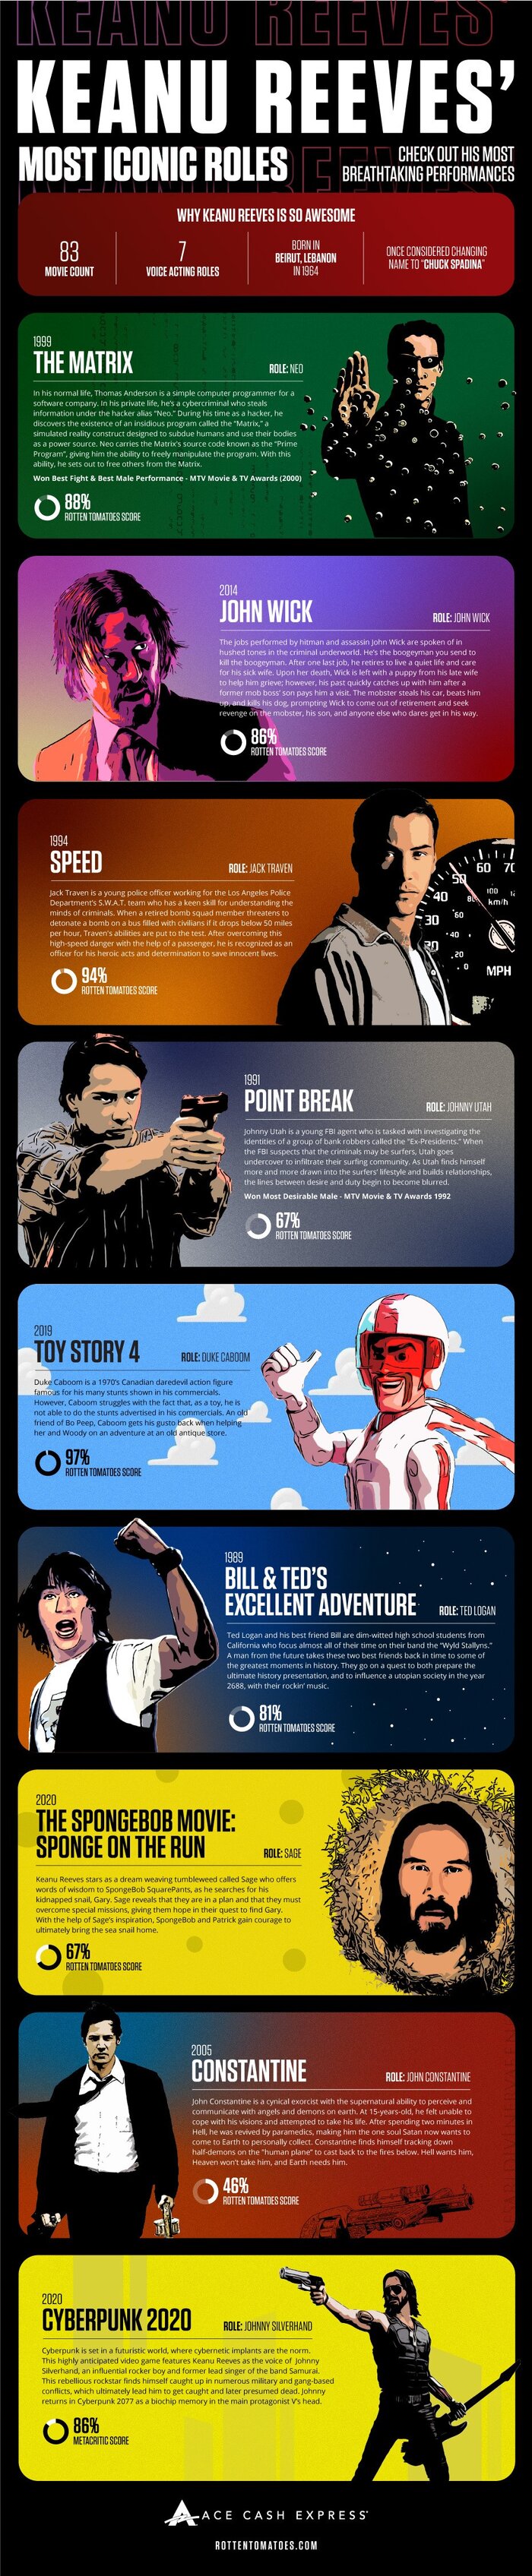 Keanu Reeves’ Most Iconic Roles Infographic